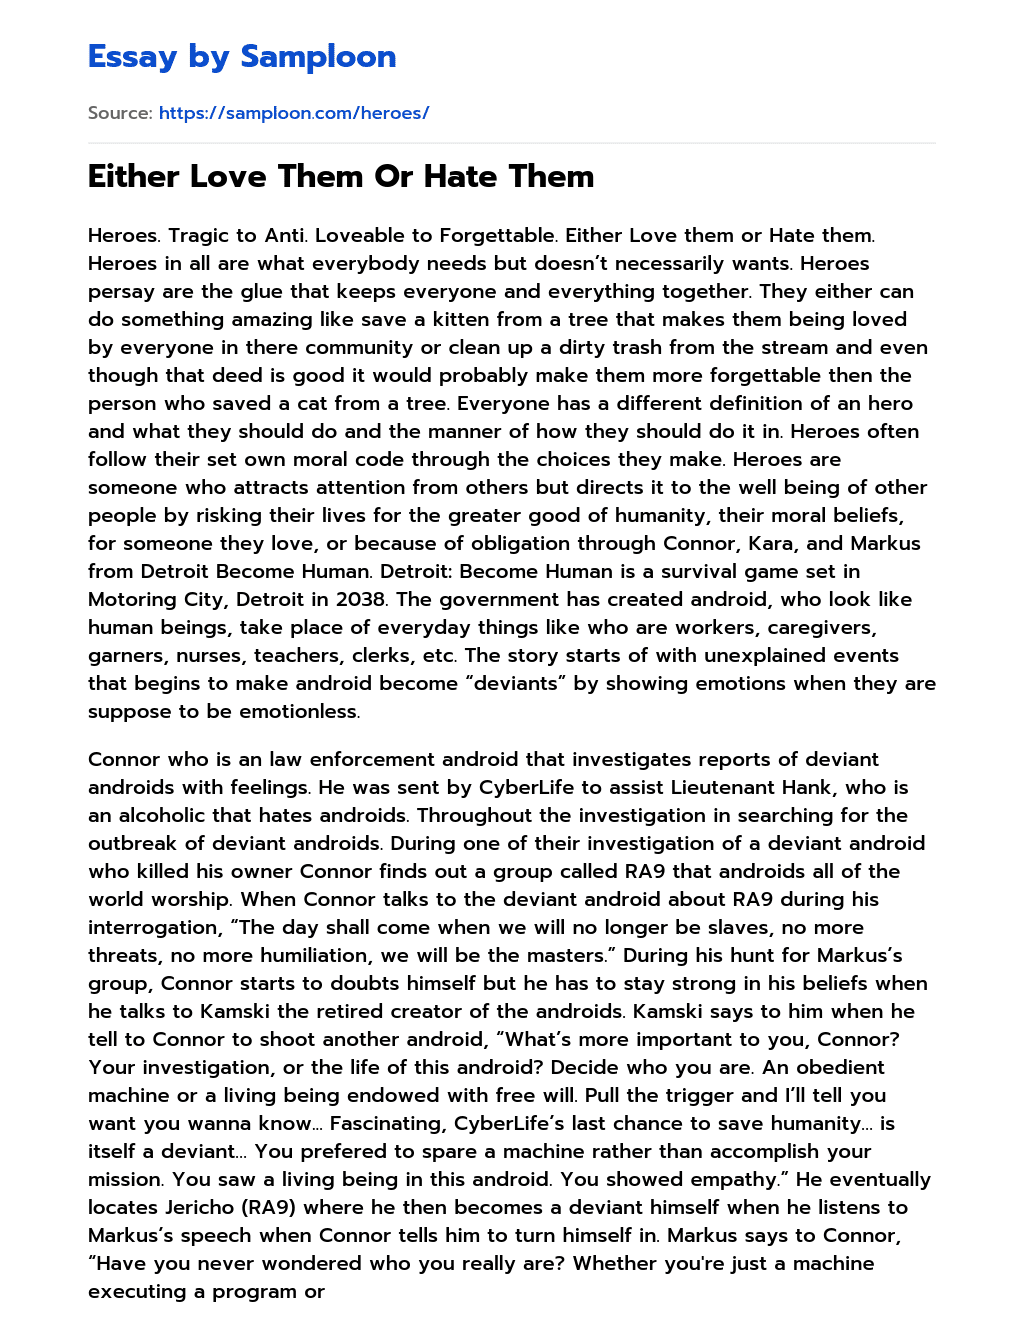 Either Love Them Or Hate Them essay